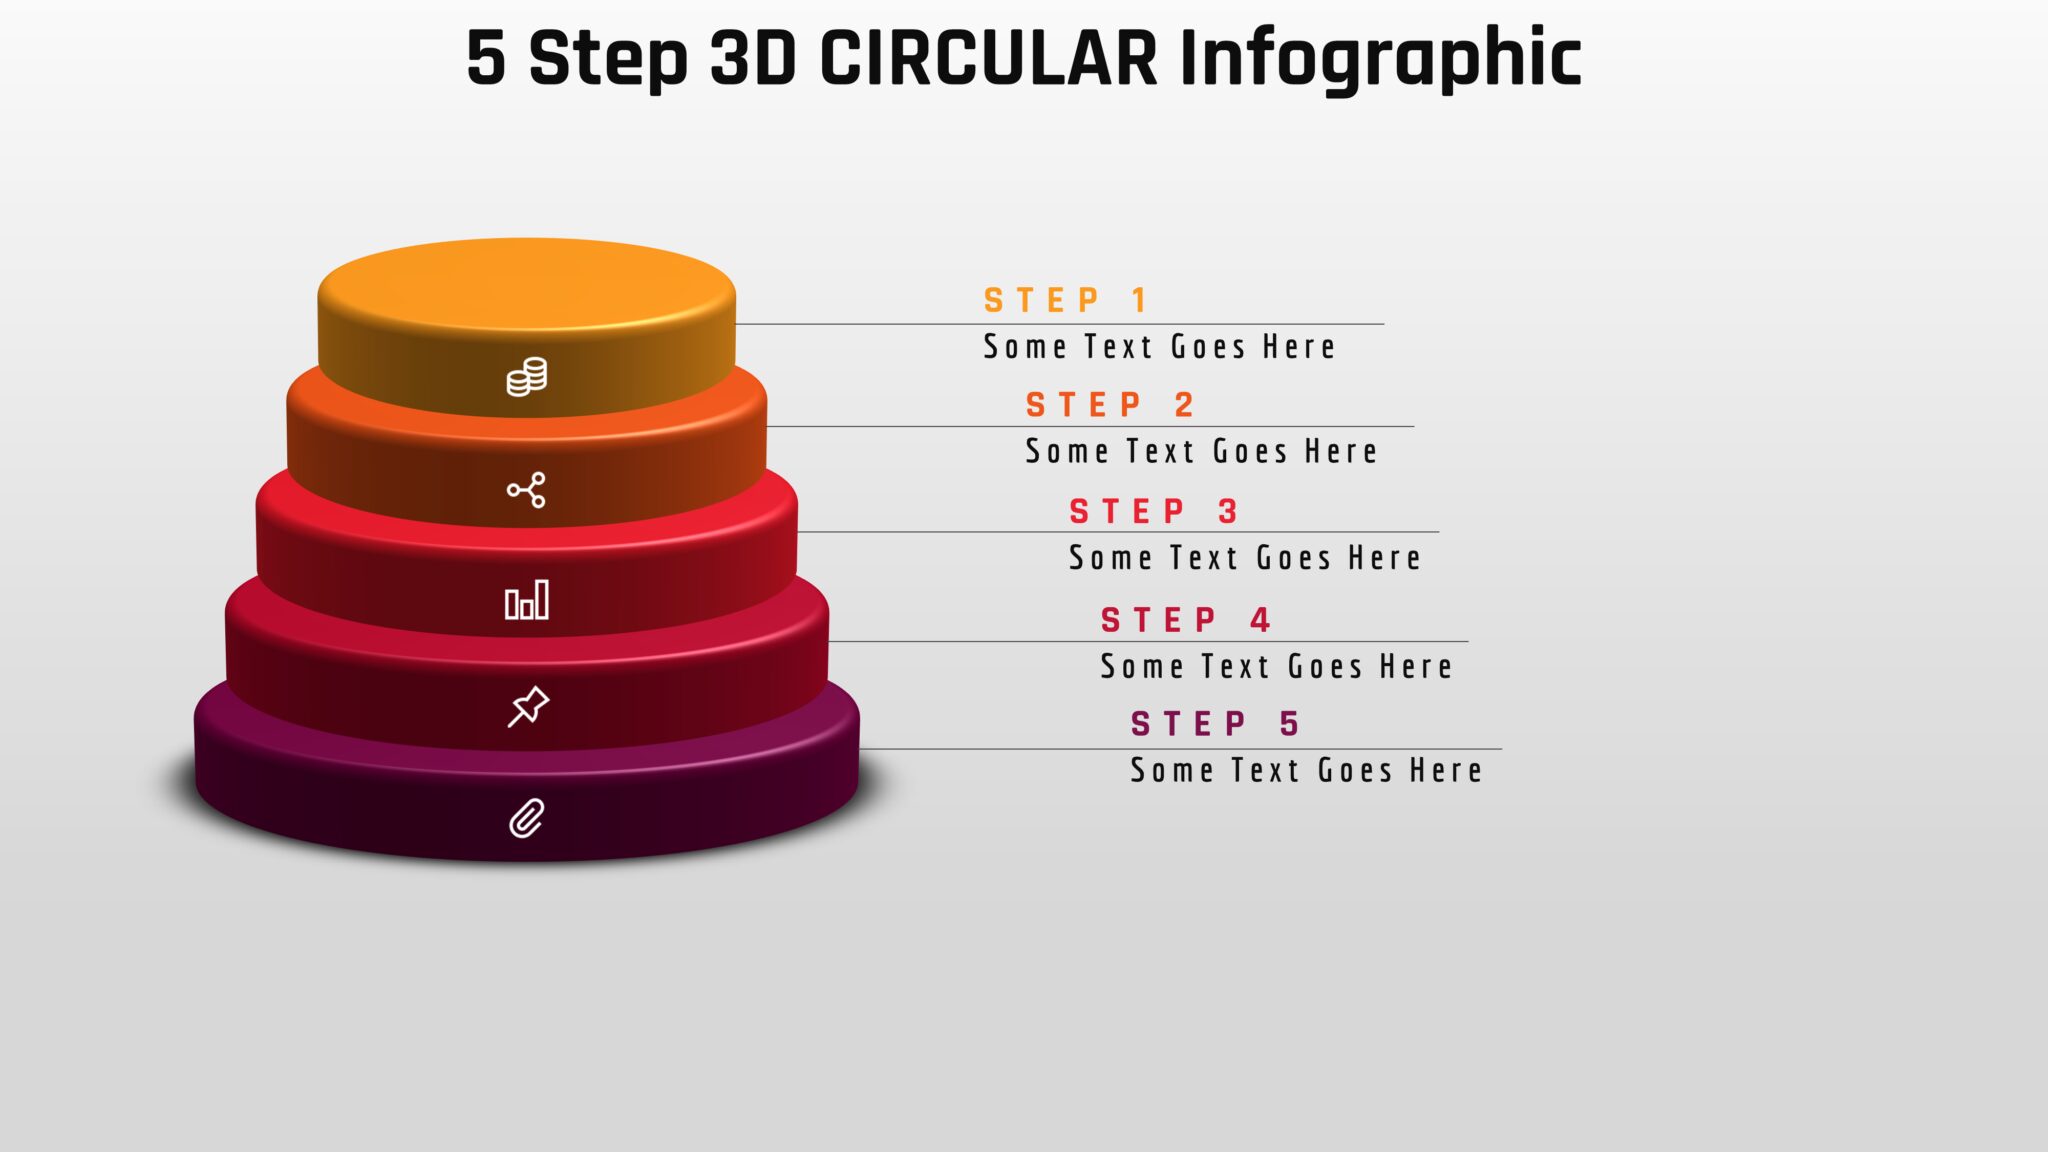 8powerpoint 5 Step 3d Circular Infographic Powerup With Powerpoint 3263